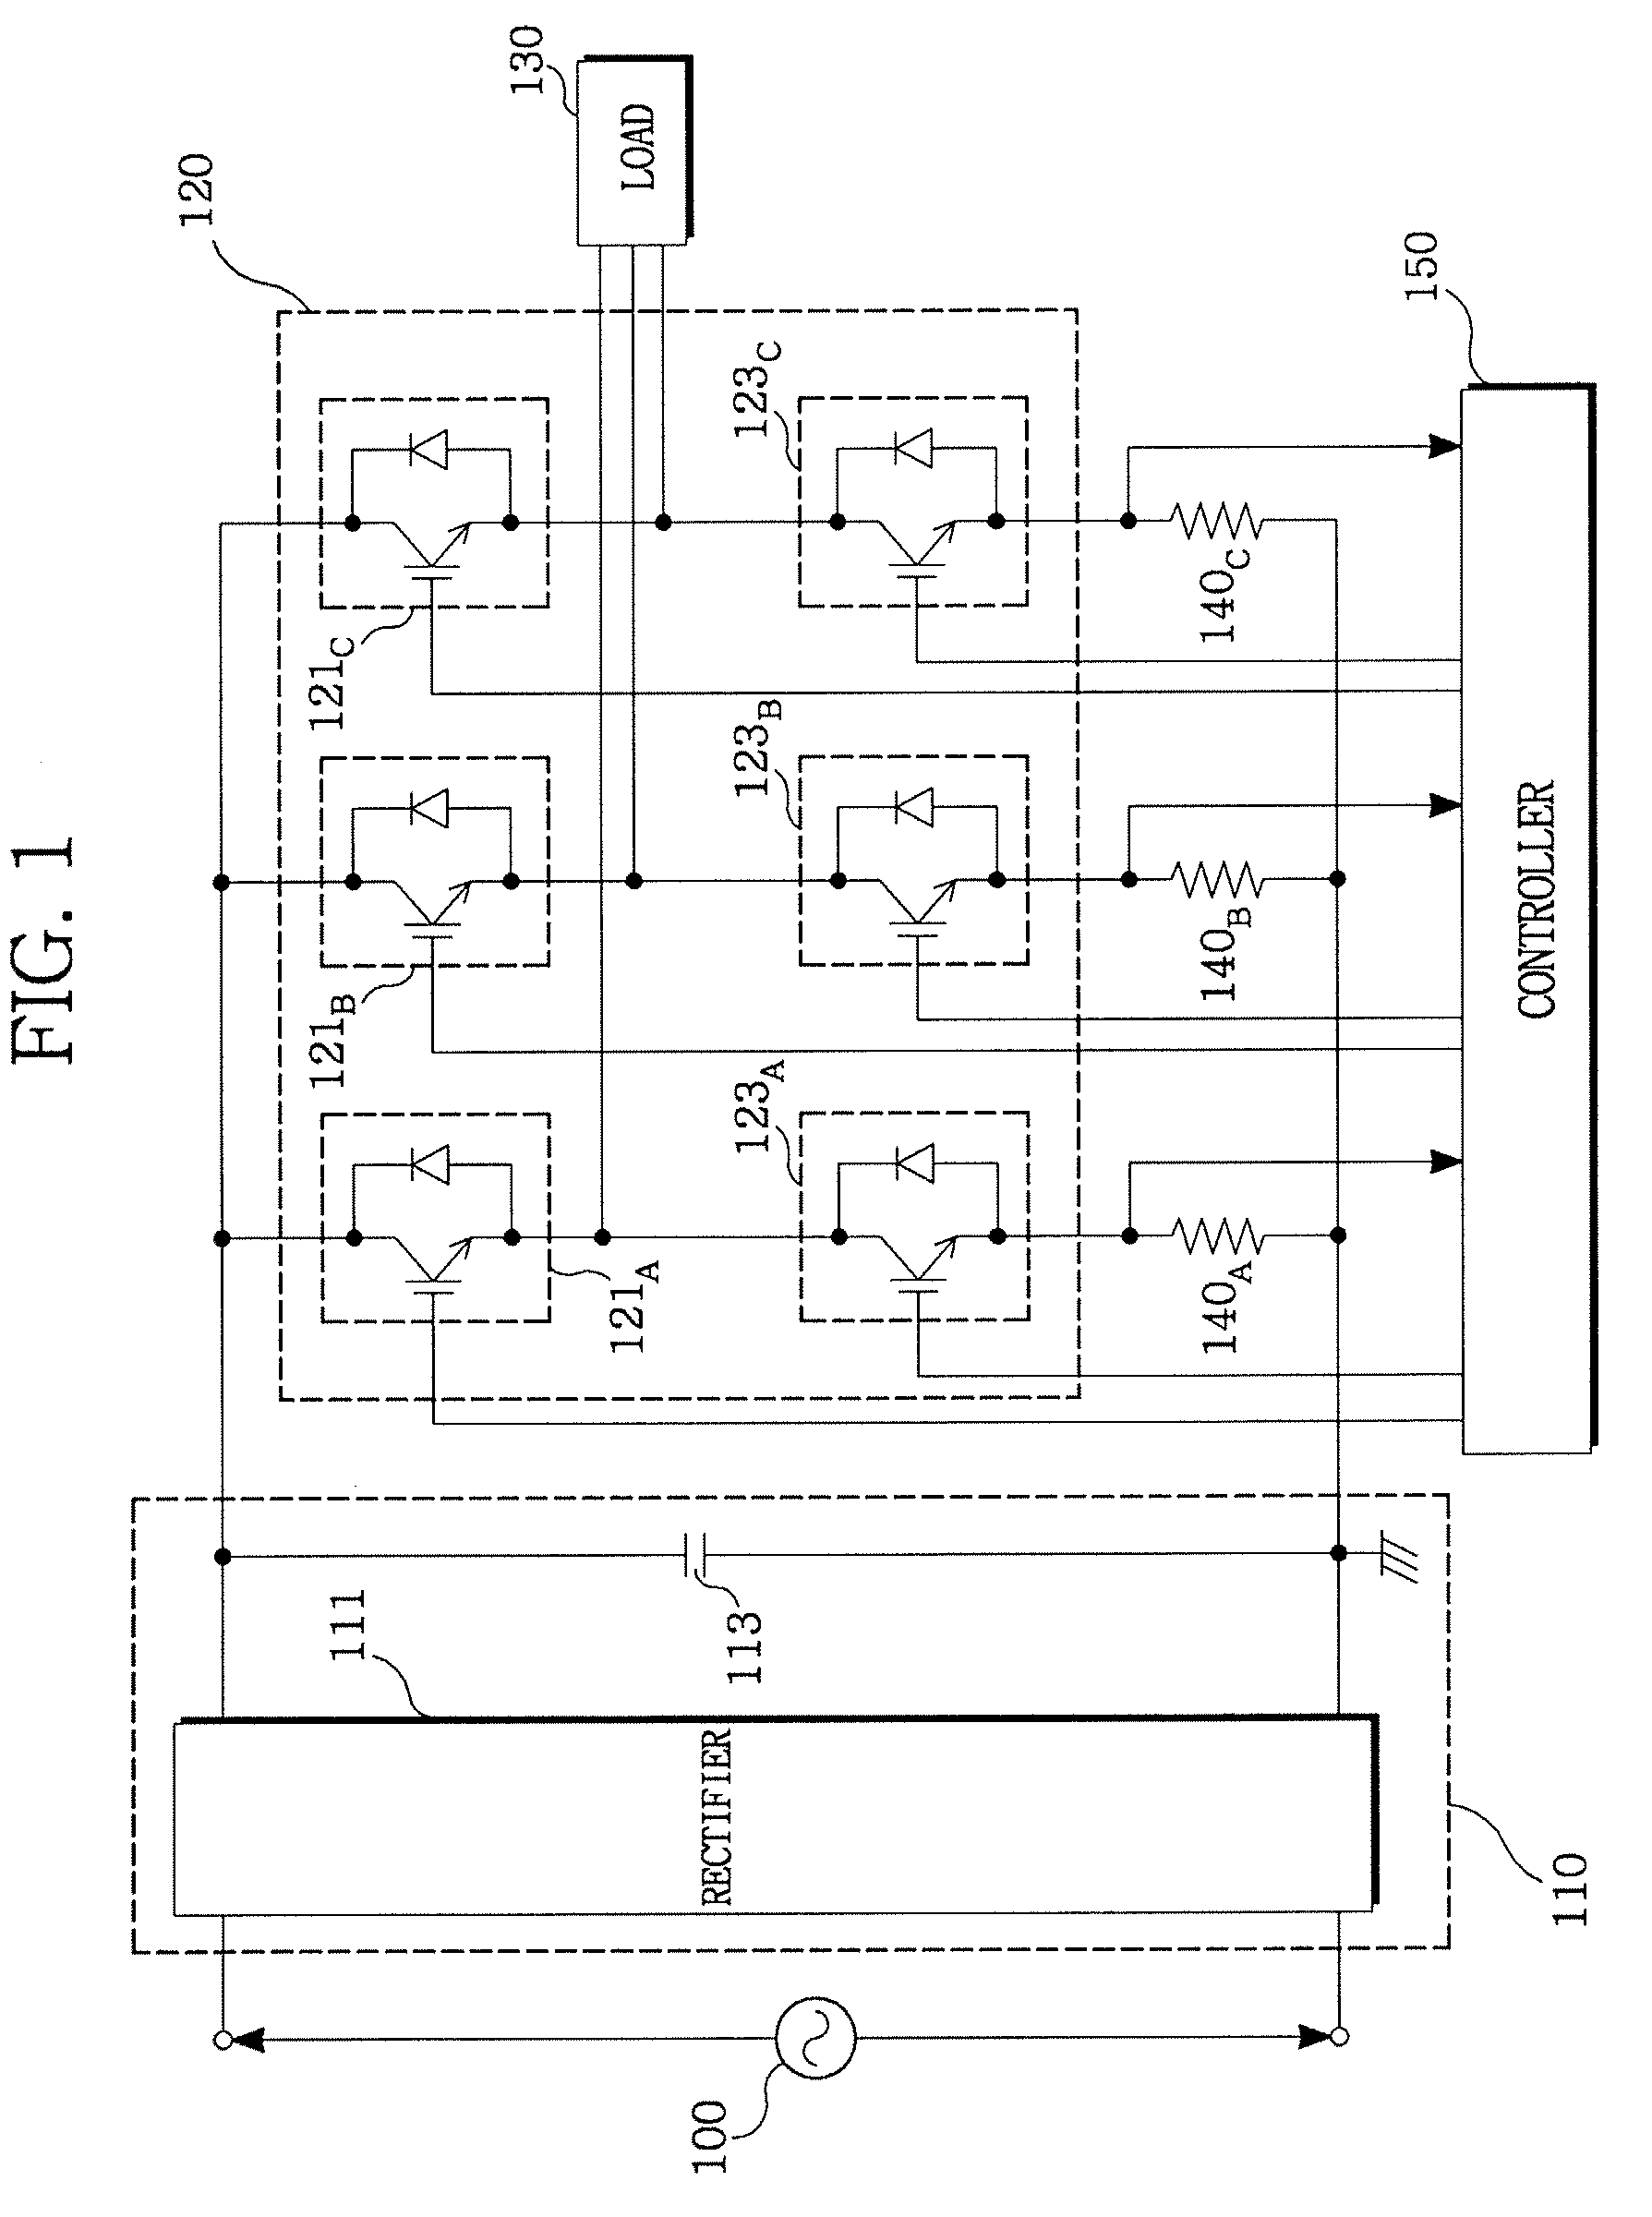 Apparatus and method for detecting phase currents of inverter